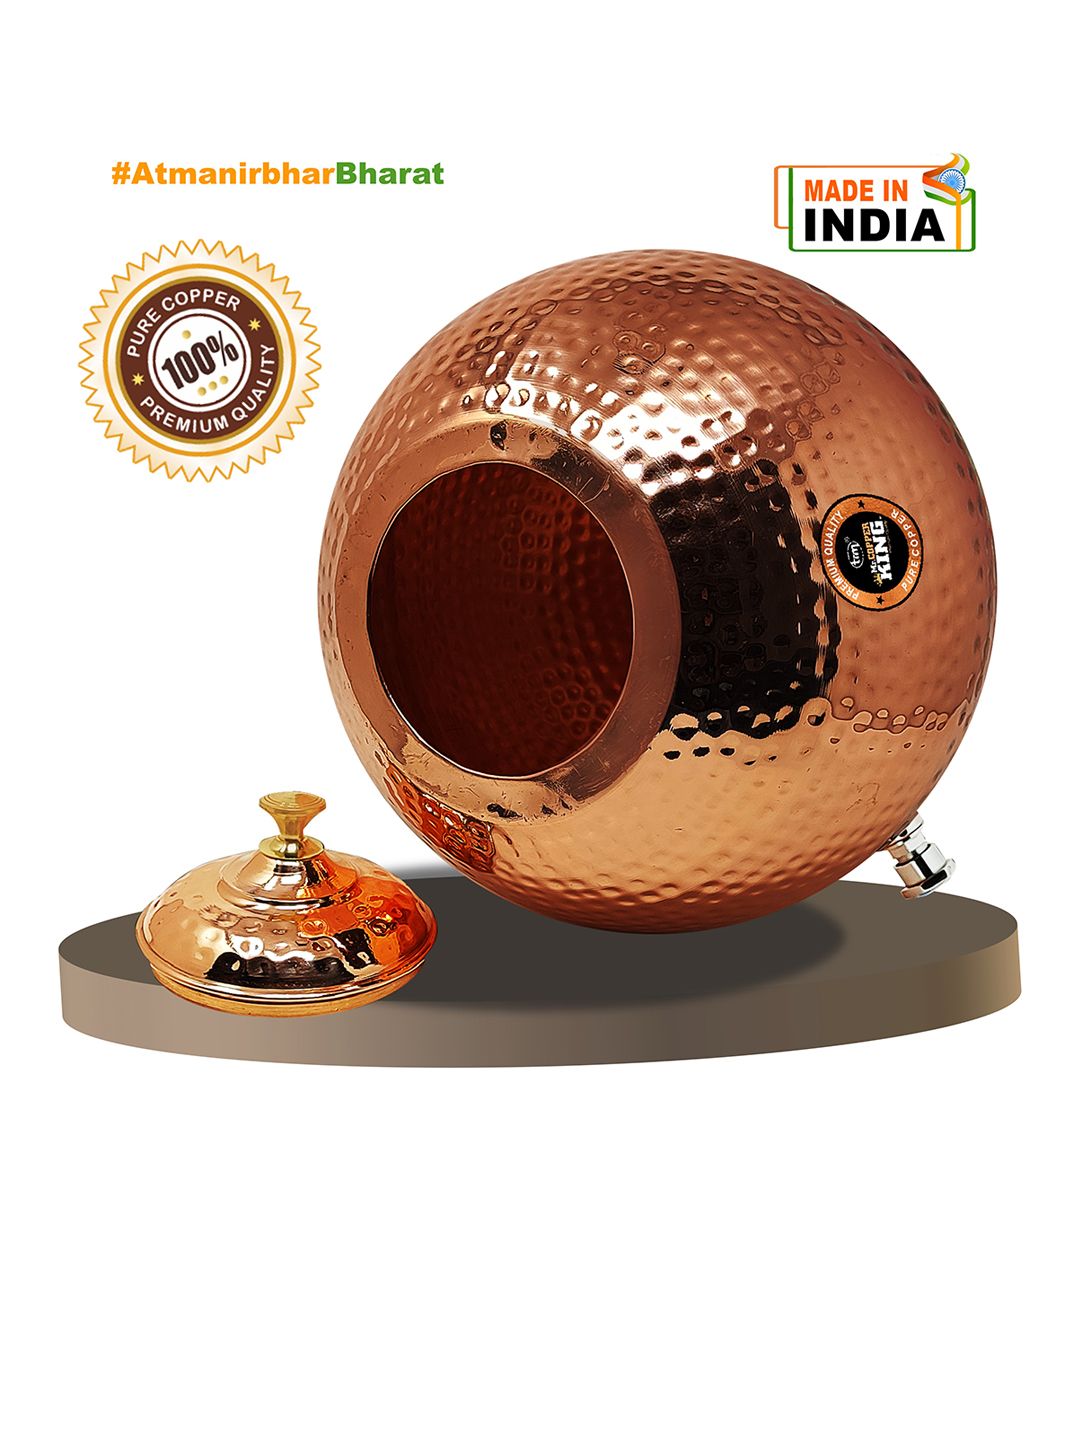 MR. COPPER KING Copper-Toned Hammered Textured Water Matka Price in India